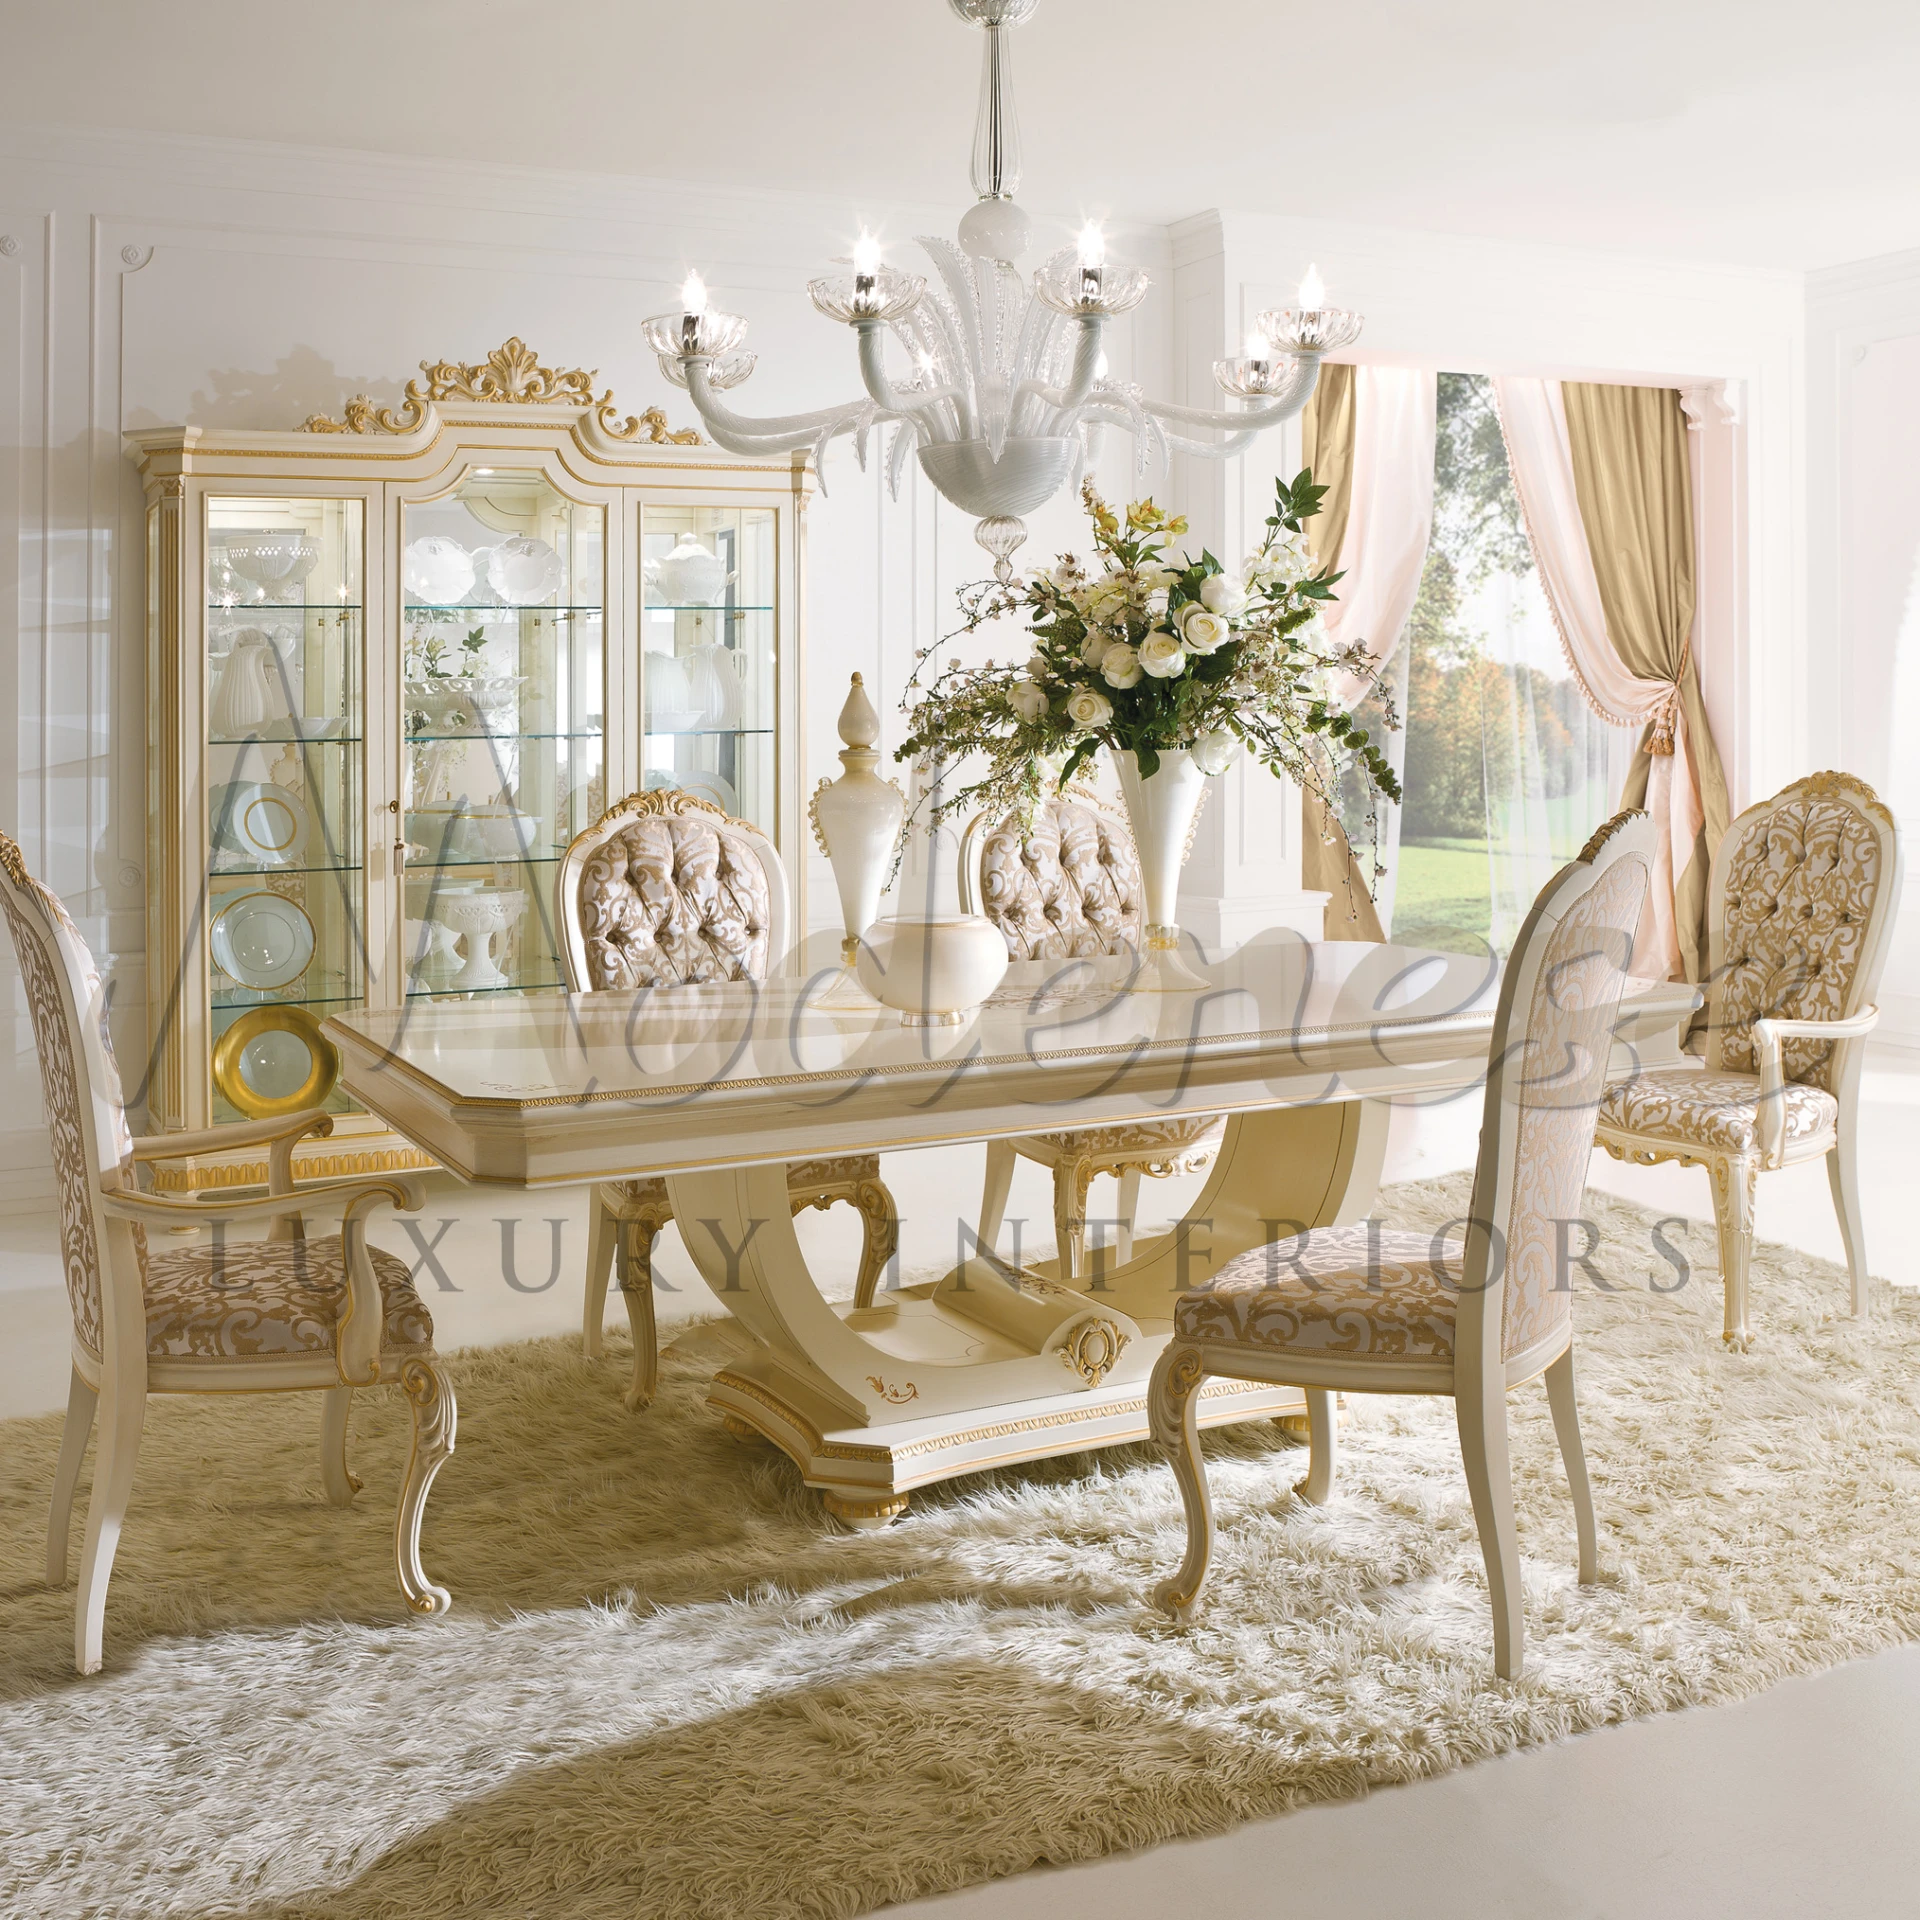 Luxurious Baroque style dining table set in a luxurious interior by Modenese Luxury Furniture.